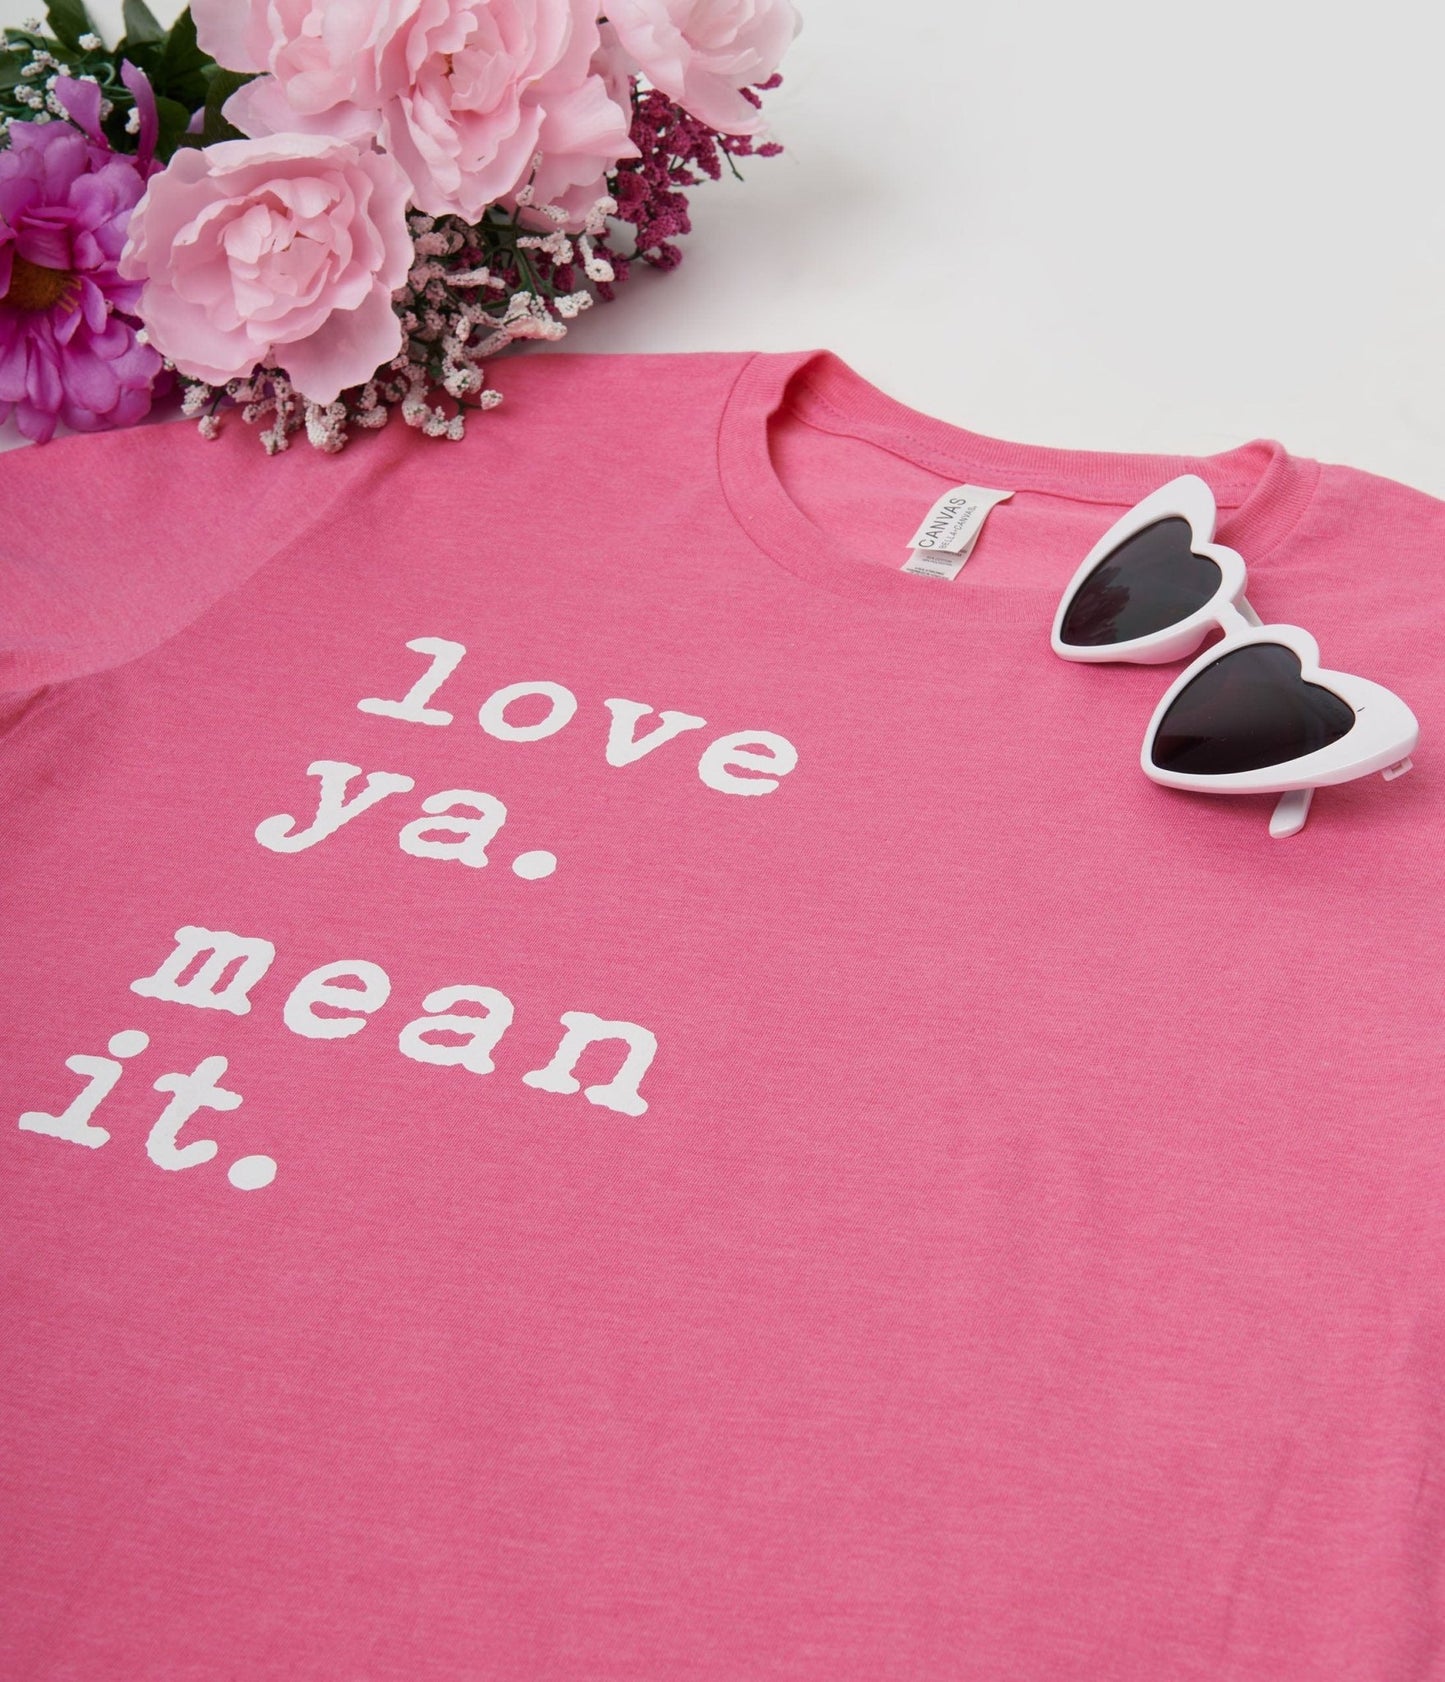 Hot Pink Love Ya Mean It Unisex Graphic Tee - Unique Vintage - Womens, GRAPHIC TEES, TEES